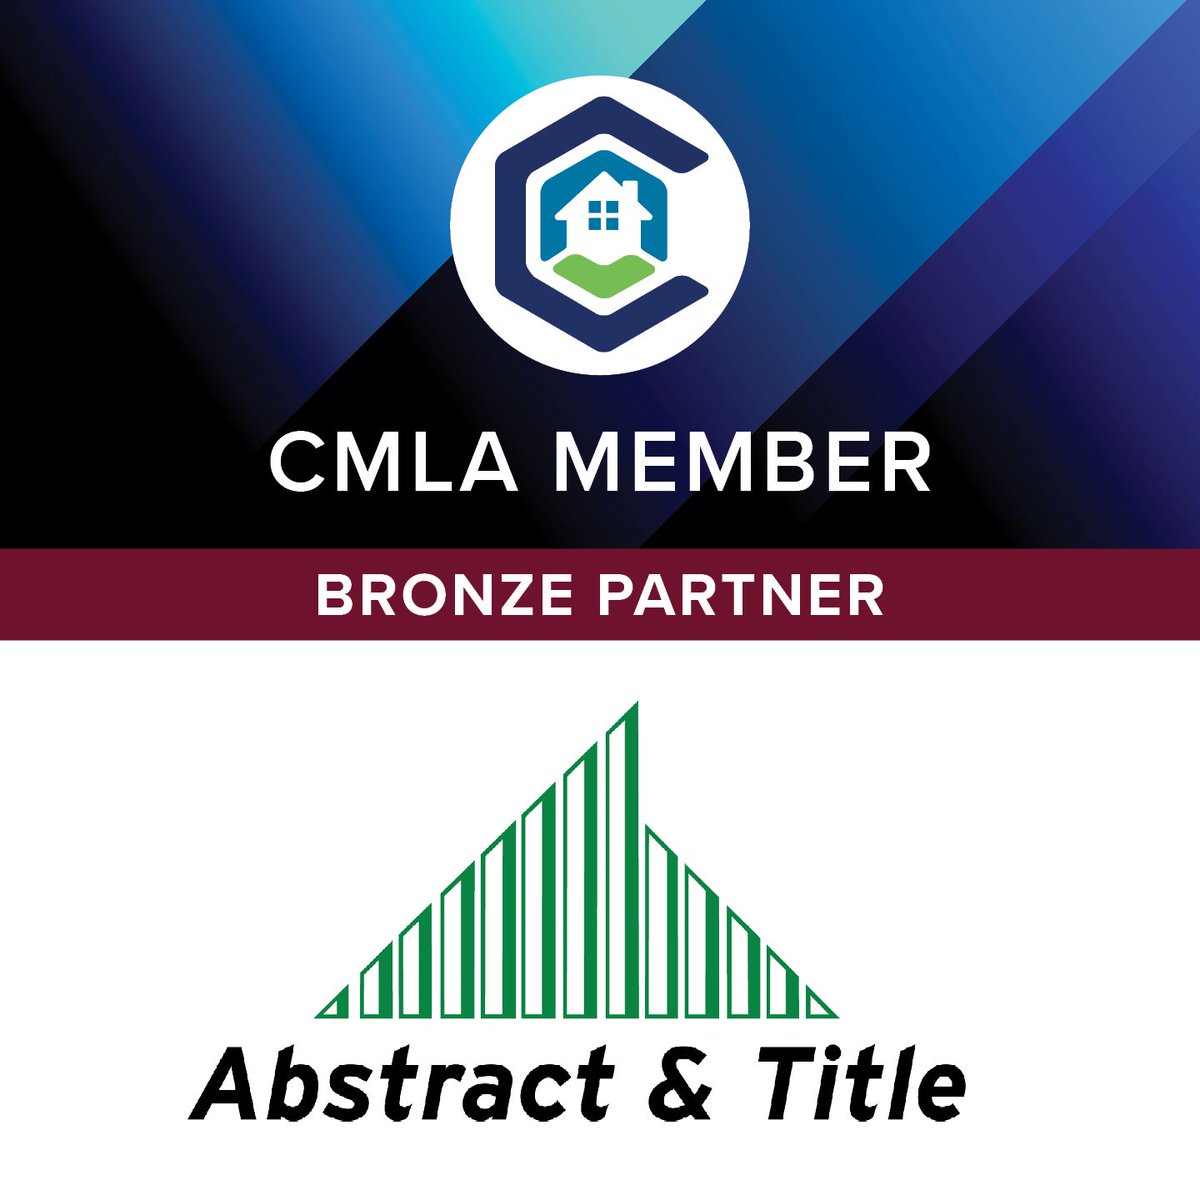 Thank you Abstract & Title for becoming a NEW CMLA MEMBER for 2024 as a BRONZE PARTNER! We appreciate your support and involvement. #cmla303 #cmlamember #bronzepartner #abstractandtitle @abstracttitleco
cmla.com/member-benefits